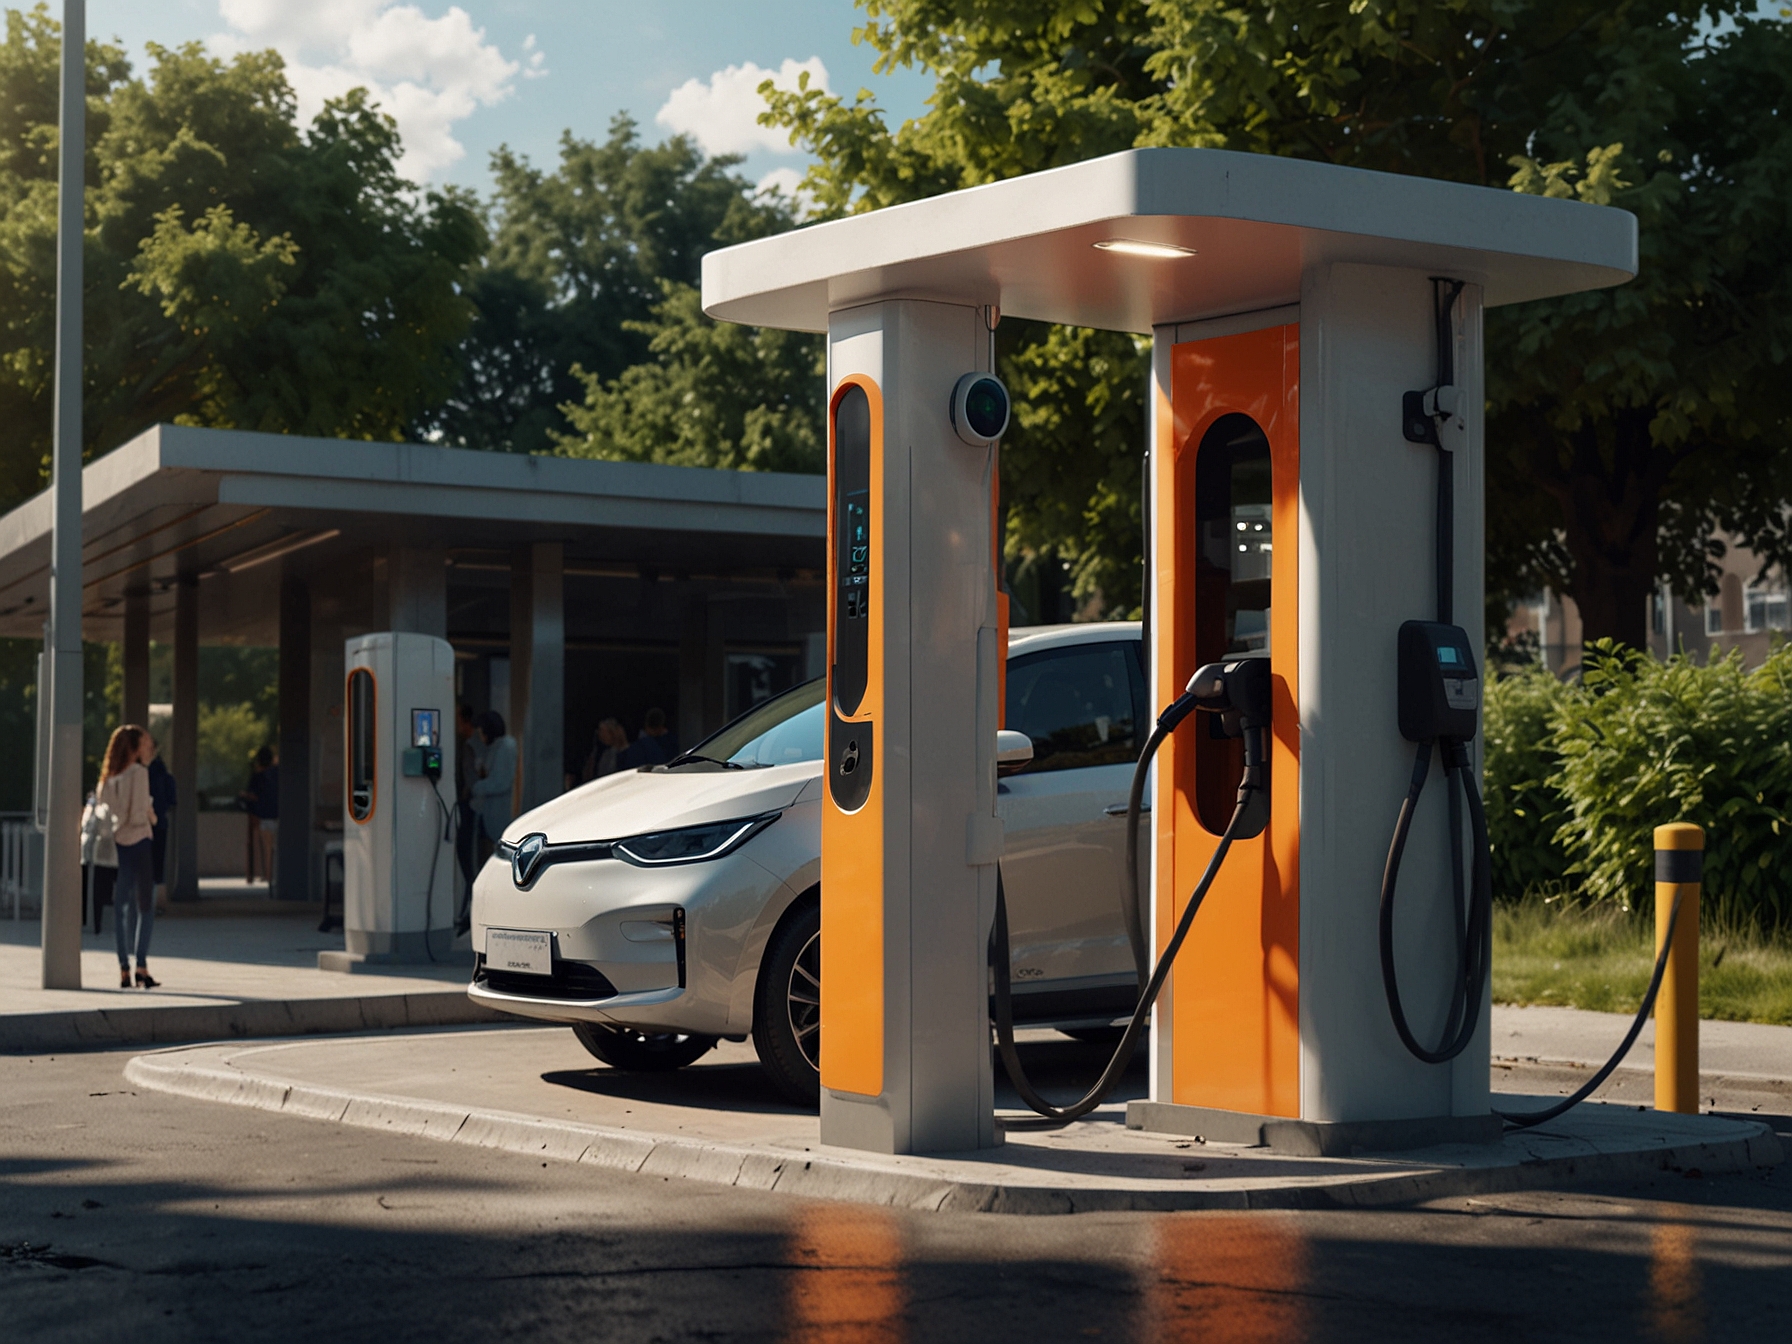 An electric vehicle charging at a public station, representing one of the proposed alternatives to high-emission cars for reducing environmental impact.